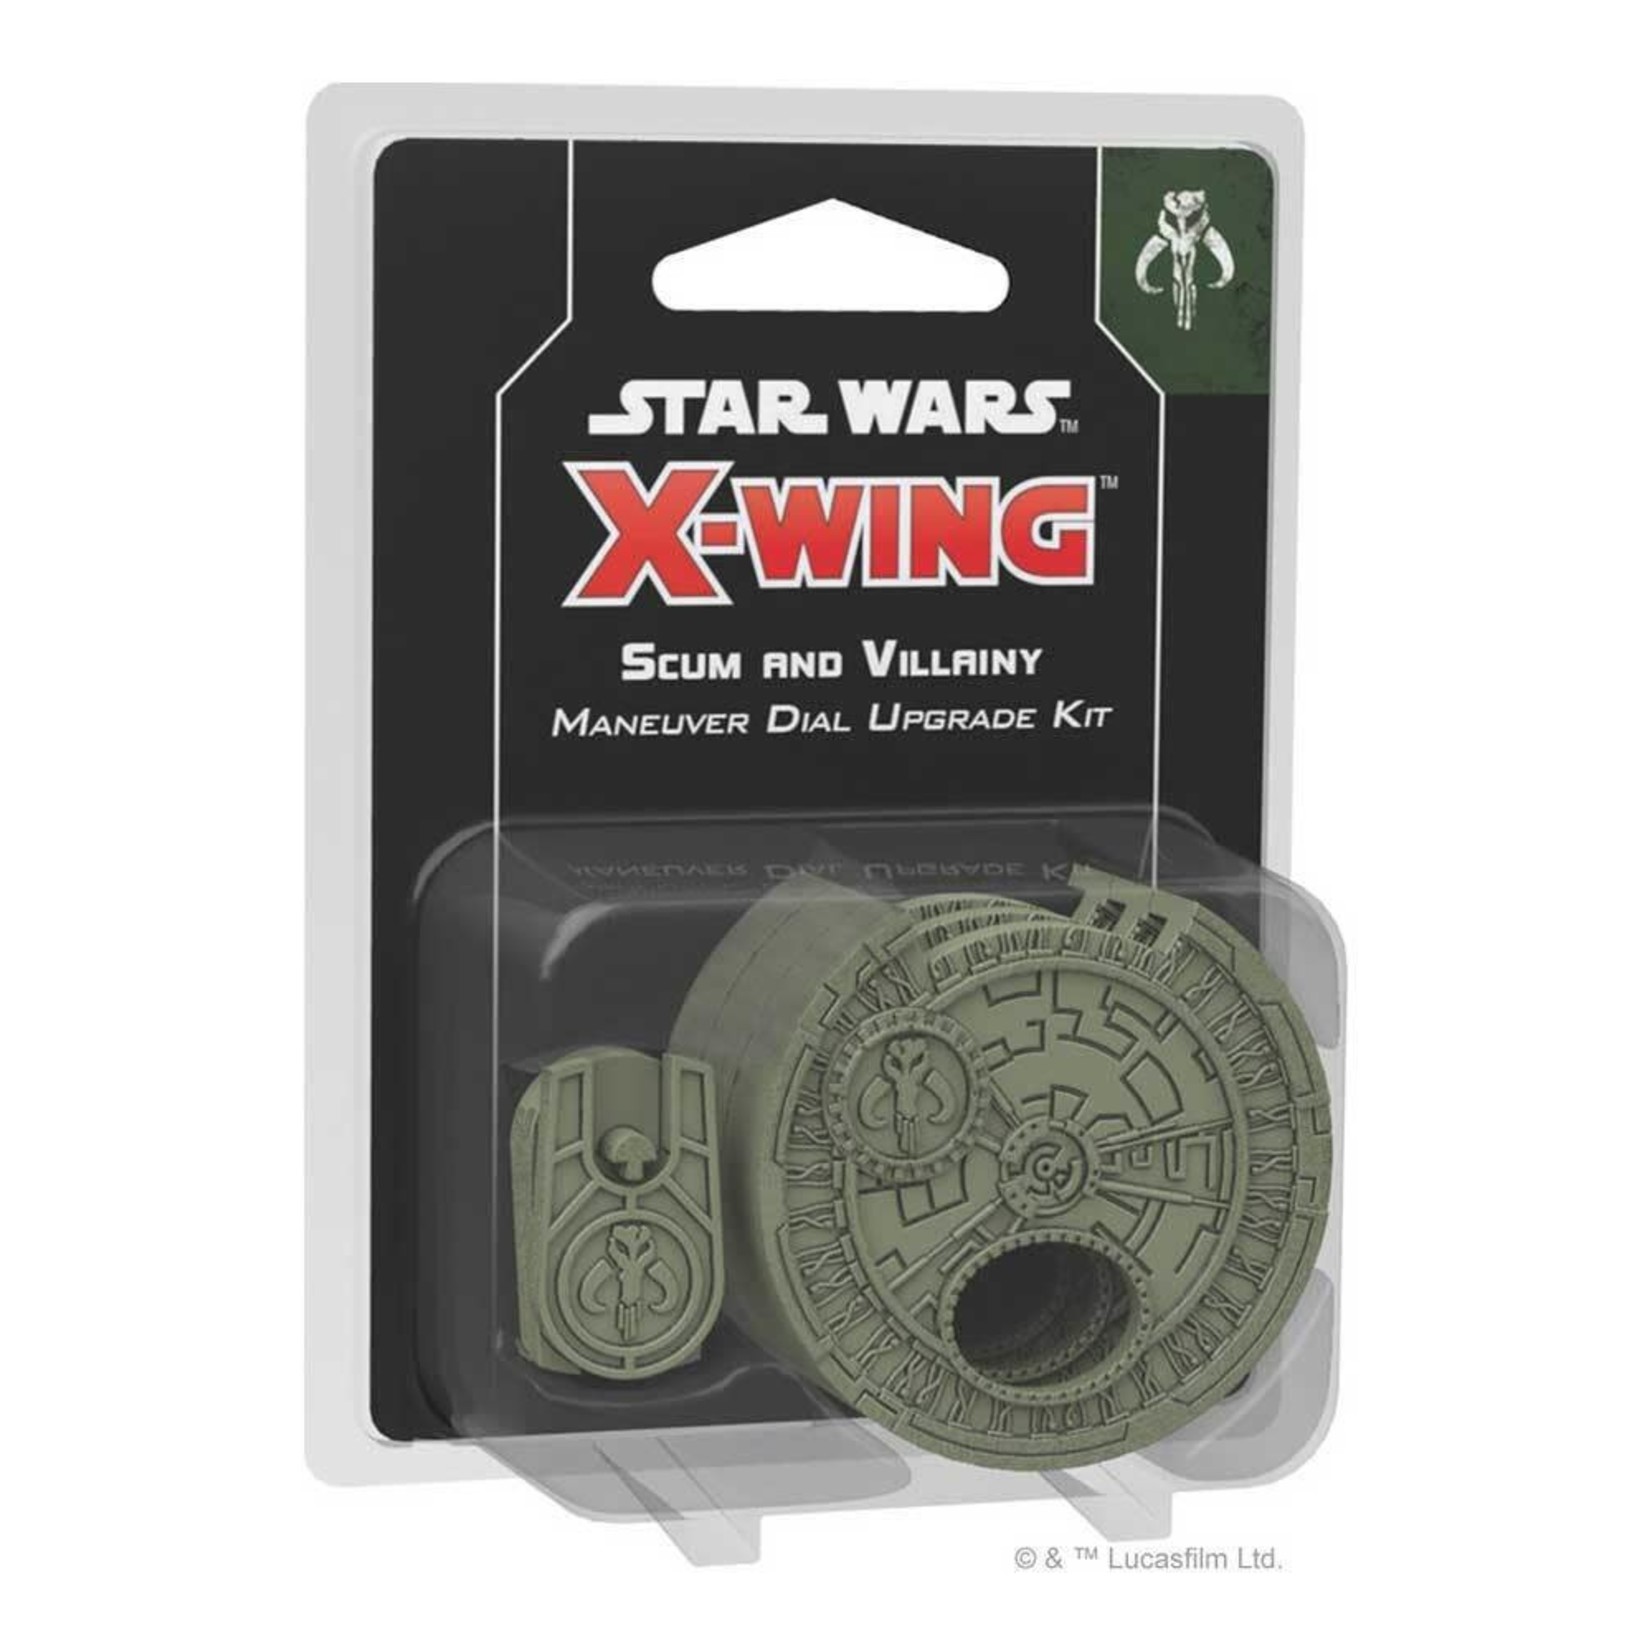 Misc FFGSWZ11 Star Wars X-Wing (2nd Edition) - Scum and Villainy Maneuver Dial Upgrade Kit FFGSWZ11